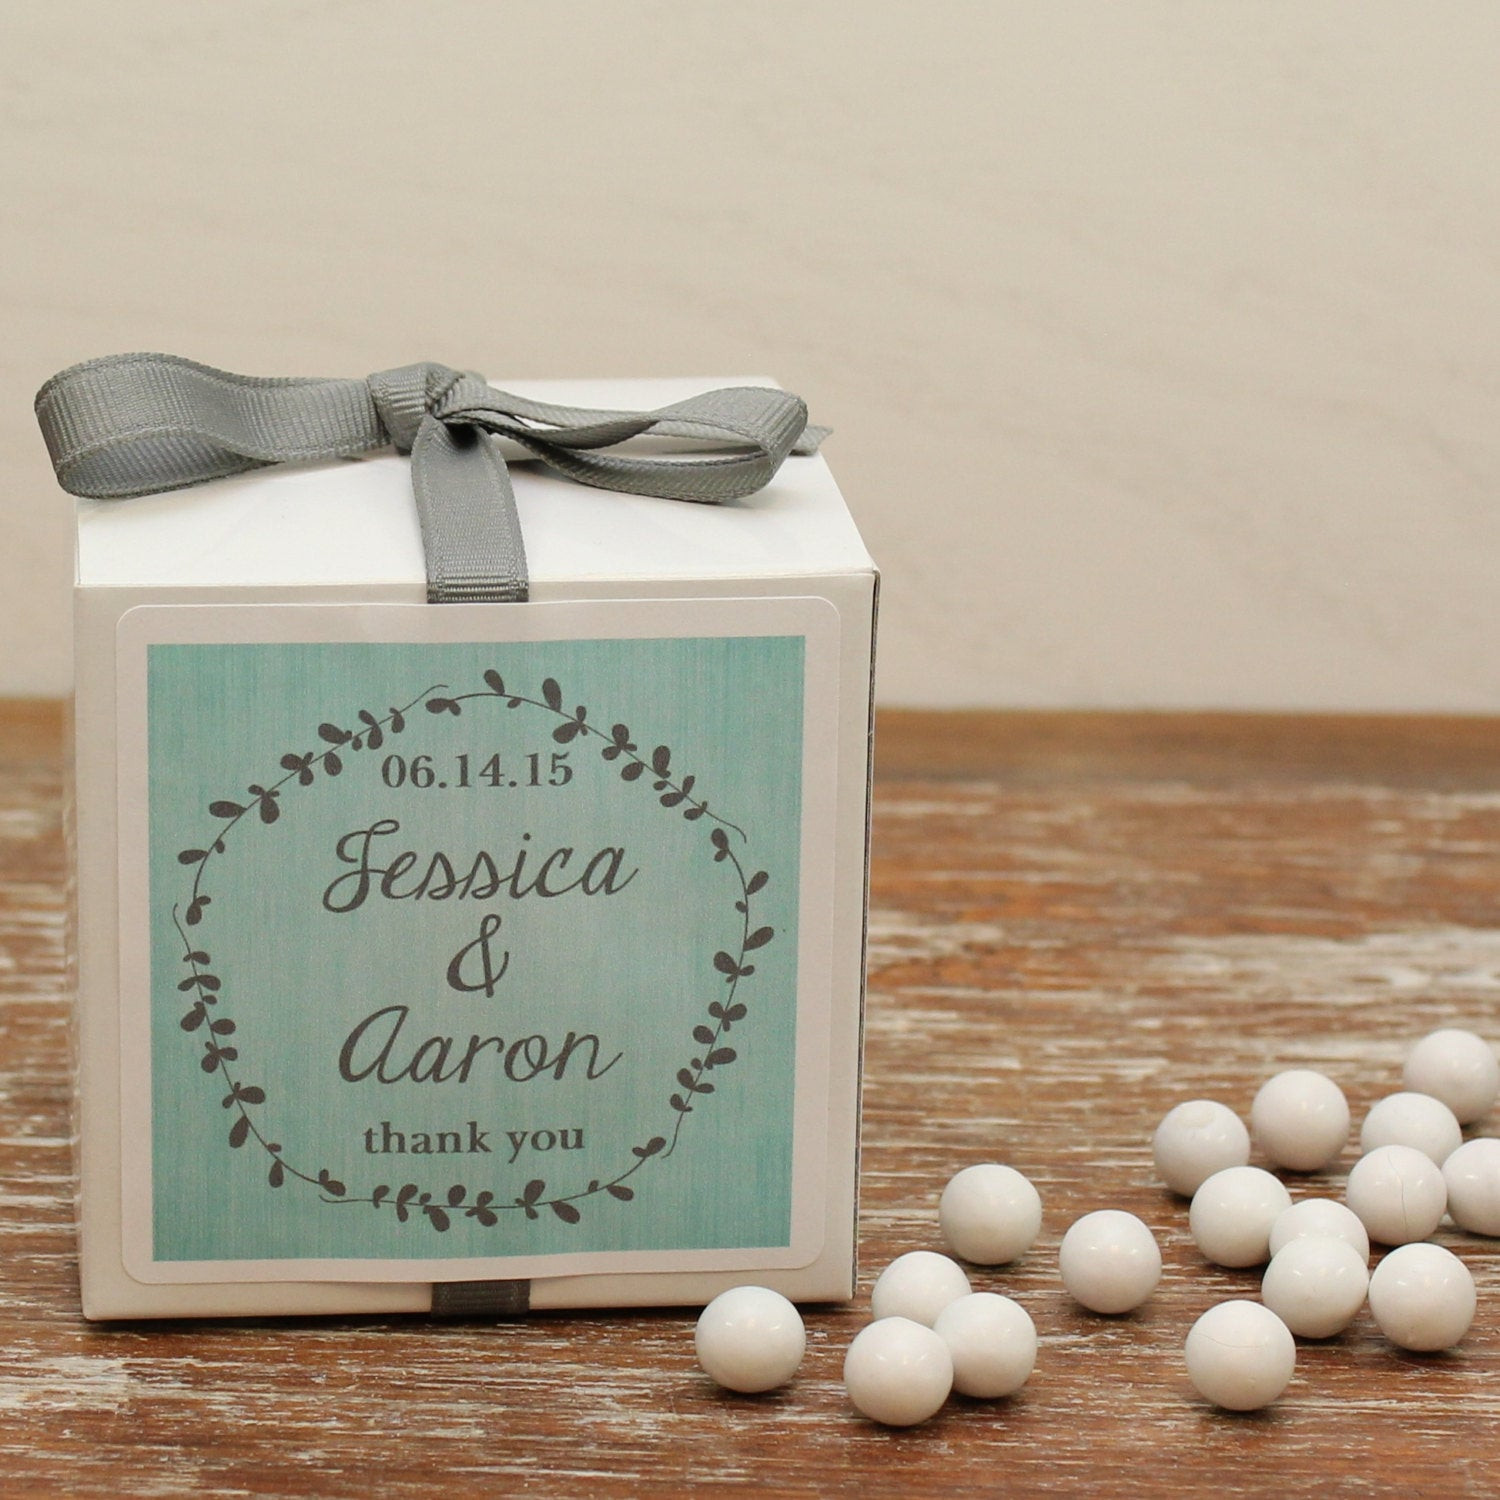 Personalized Wedding Favor Boxes
 12 Personalized Wedding Favor Boxes Laurel Label by